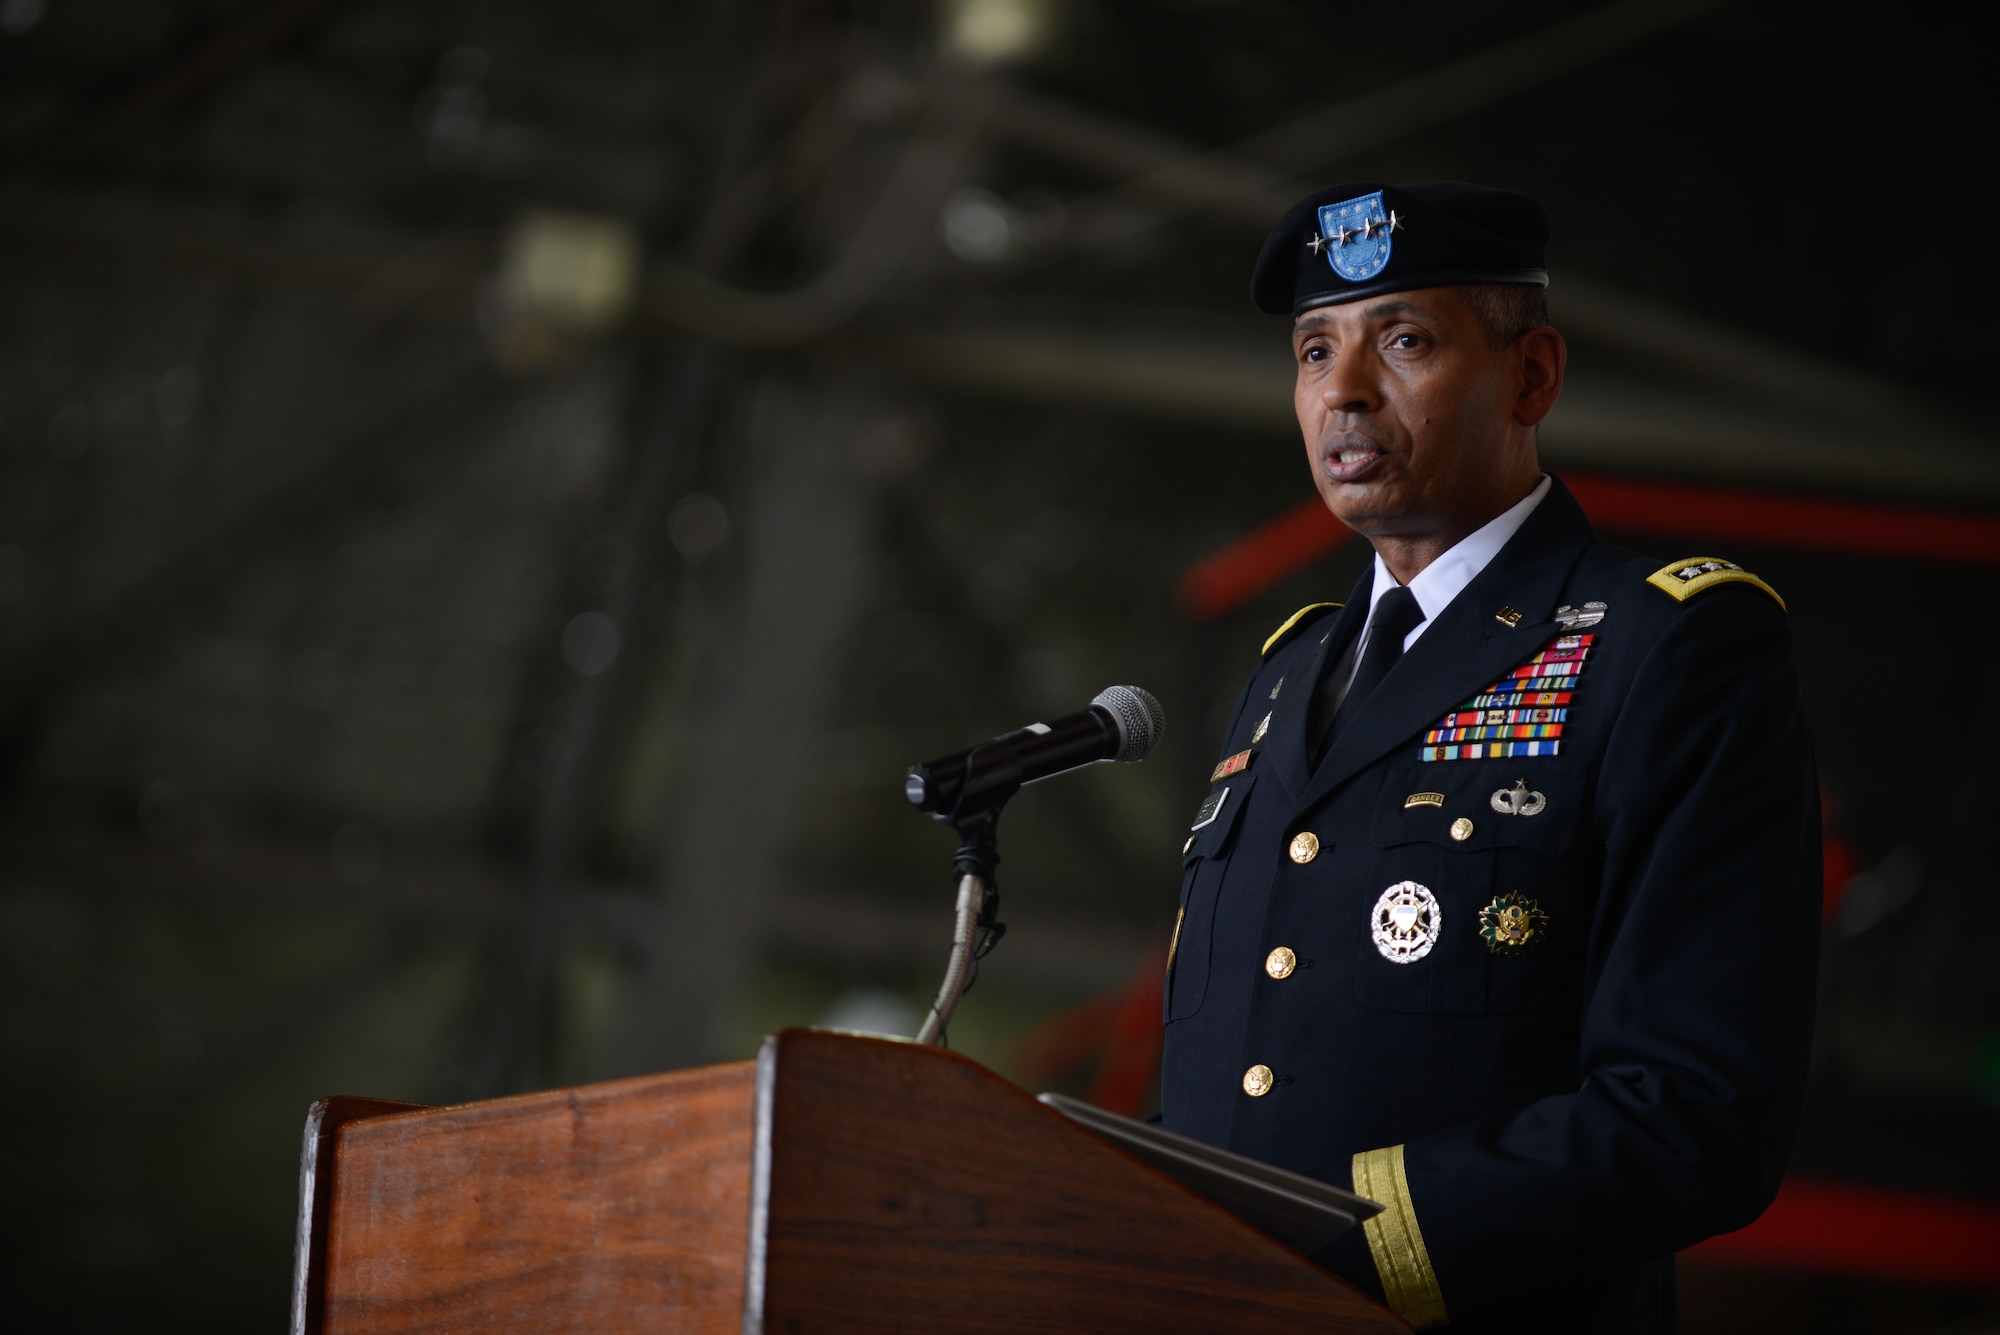 Gen. Vincent K. Brooks, U.S. Forces Korea commander, addresses the audience during the Seventh Air Force change of command ceremony at Osan Air Base July 8, 2016. Lt. Gen. Thomas W. Bergeson became the 34th commander of Seventh Air Force, taking over for Lt. Gen. Terrence J. O'Shaughnessy who moves on to take over as Pacific Air Forces commander. (U.S. Air Force photo by Senior Airman Dillian Bamman/Released)